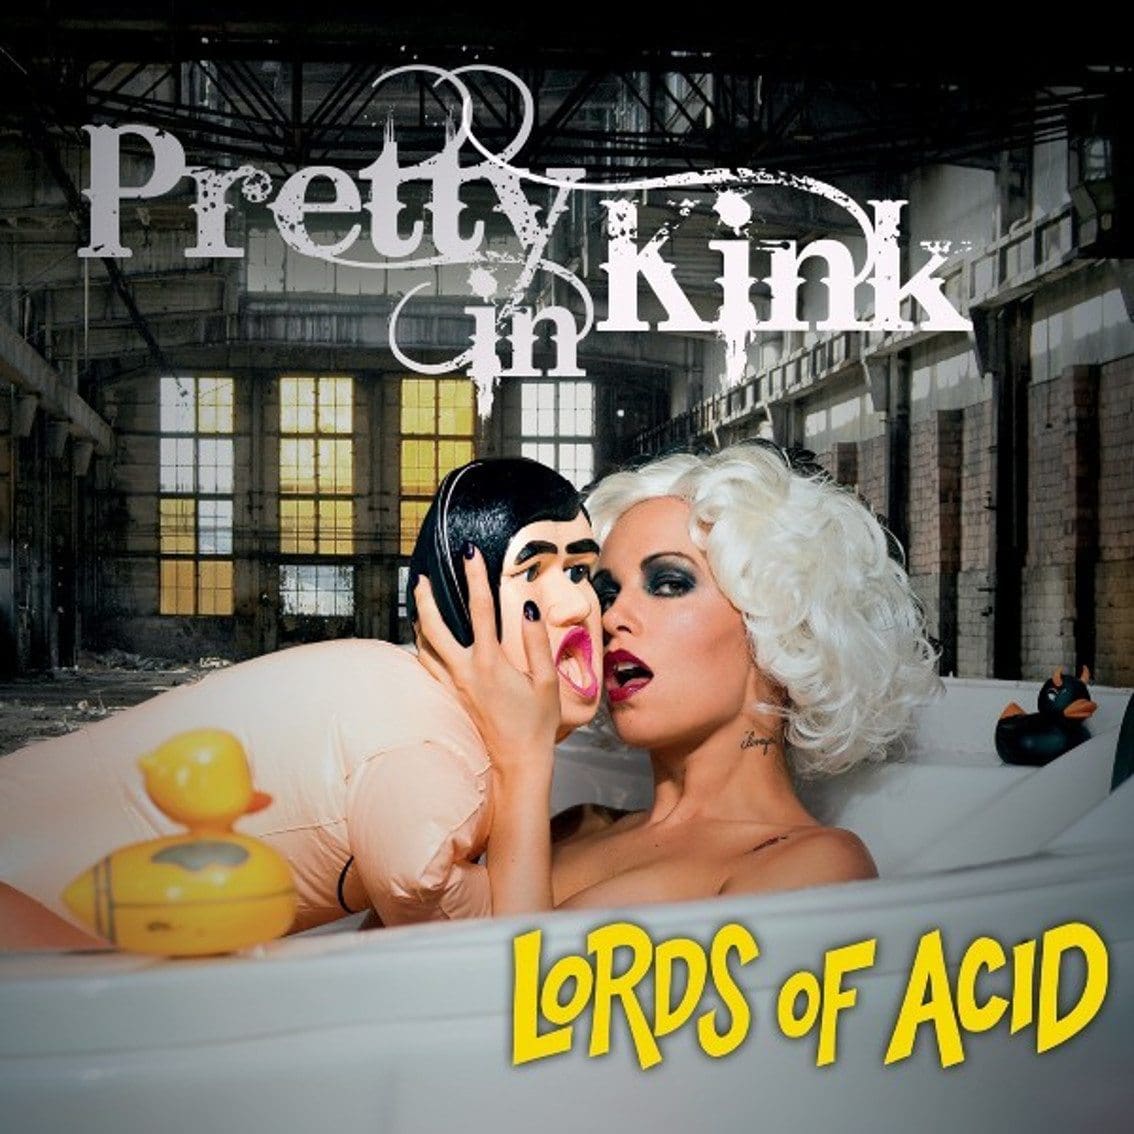 Lors Of Acid return with'Pretty in kink' album (also on vinyl)